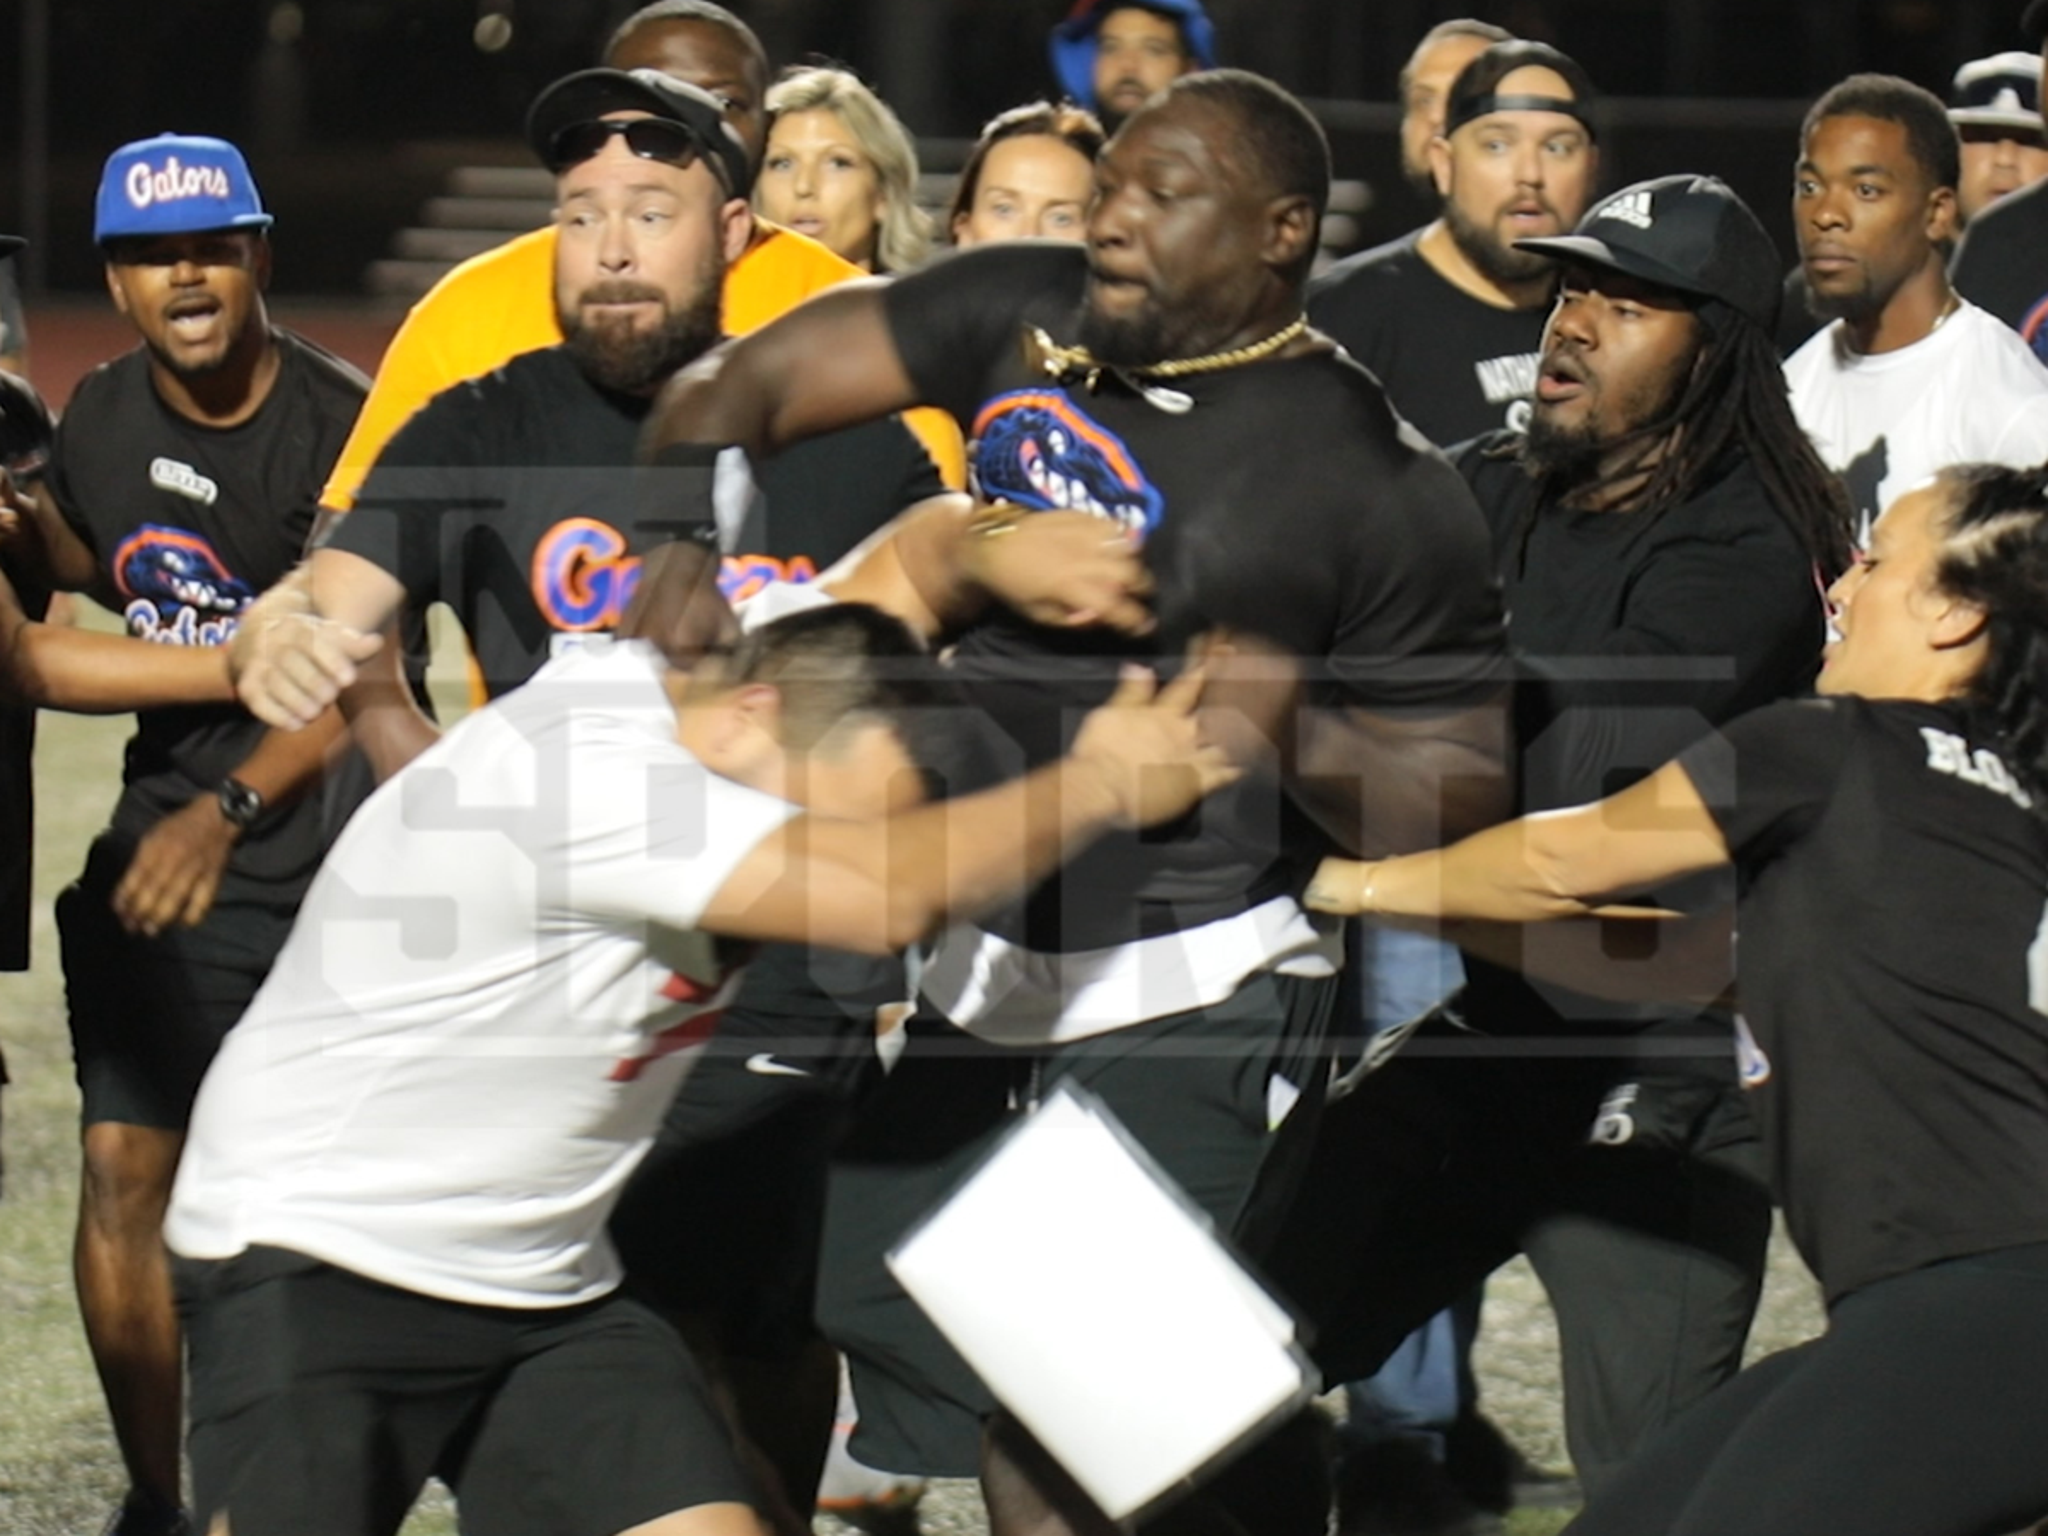 LeGarrette Blount Throws Punches In Fight At Youth Football Game, Cops Investigating - TMZ (Picture 1)